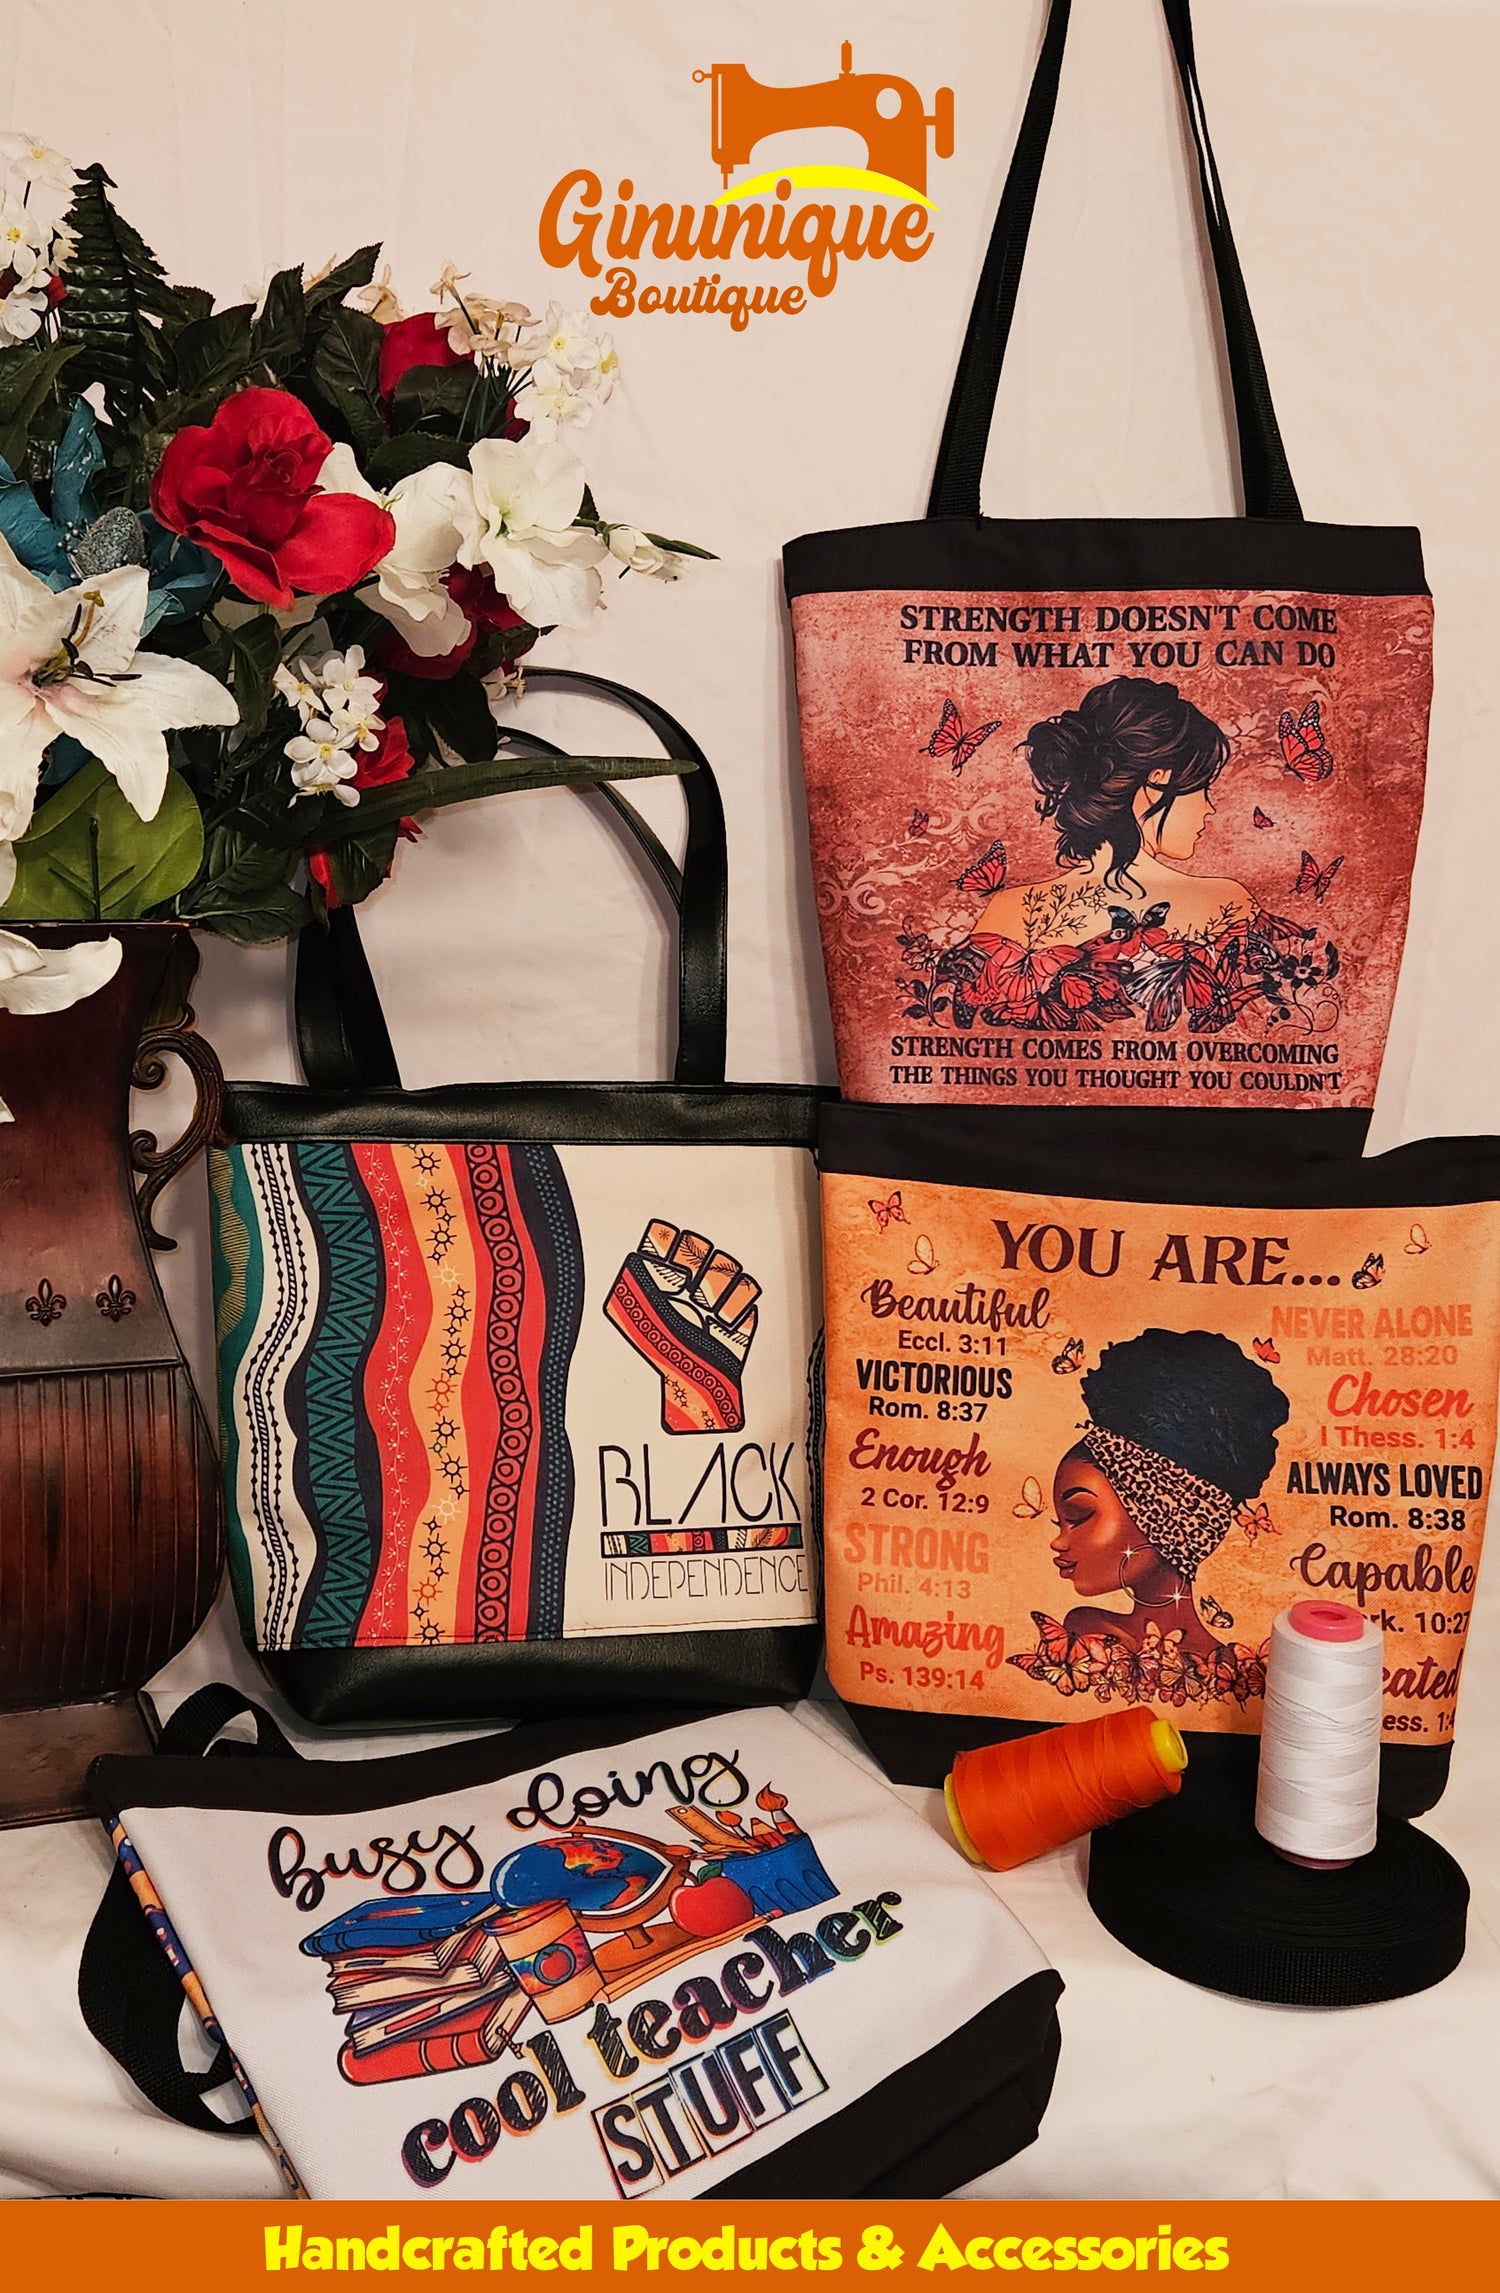 Tote bags are customized, assembled, and sewnby Ginunique. 